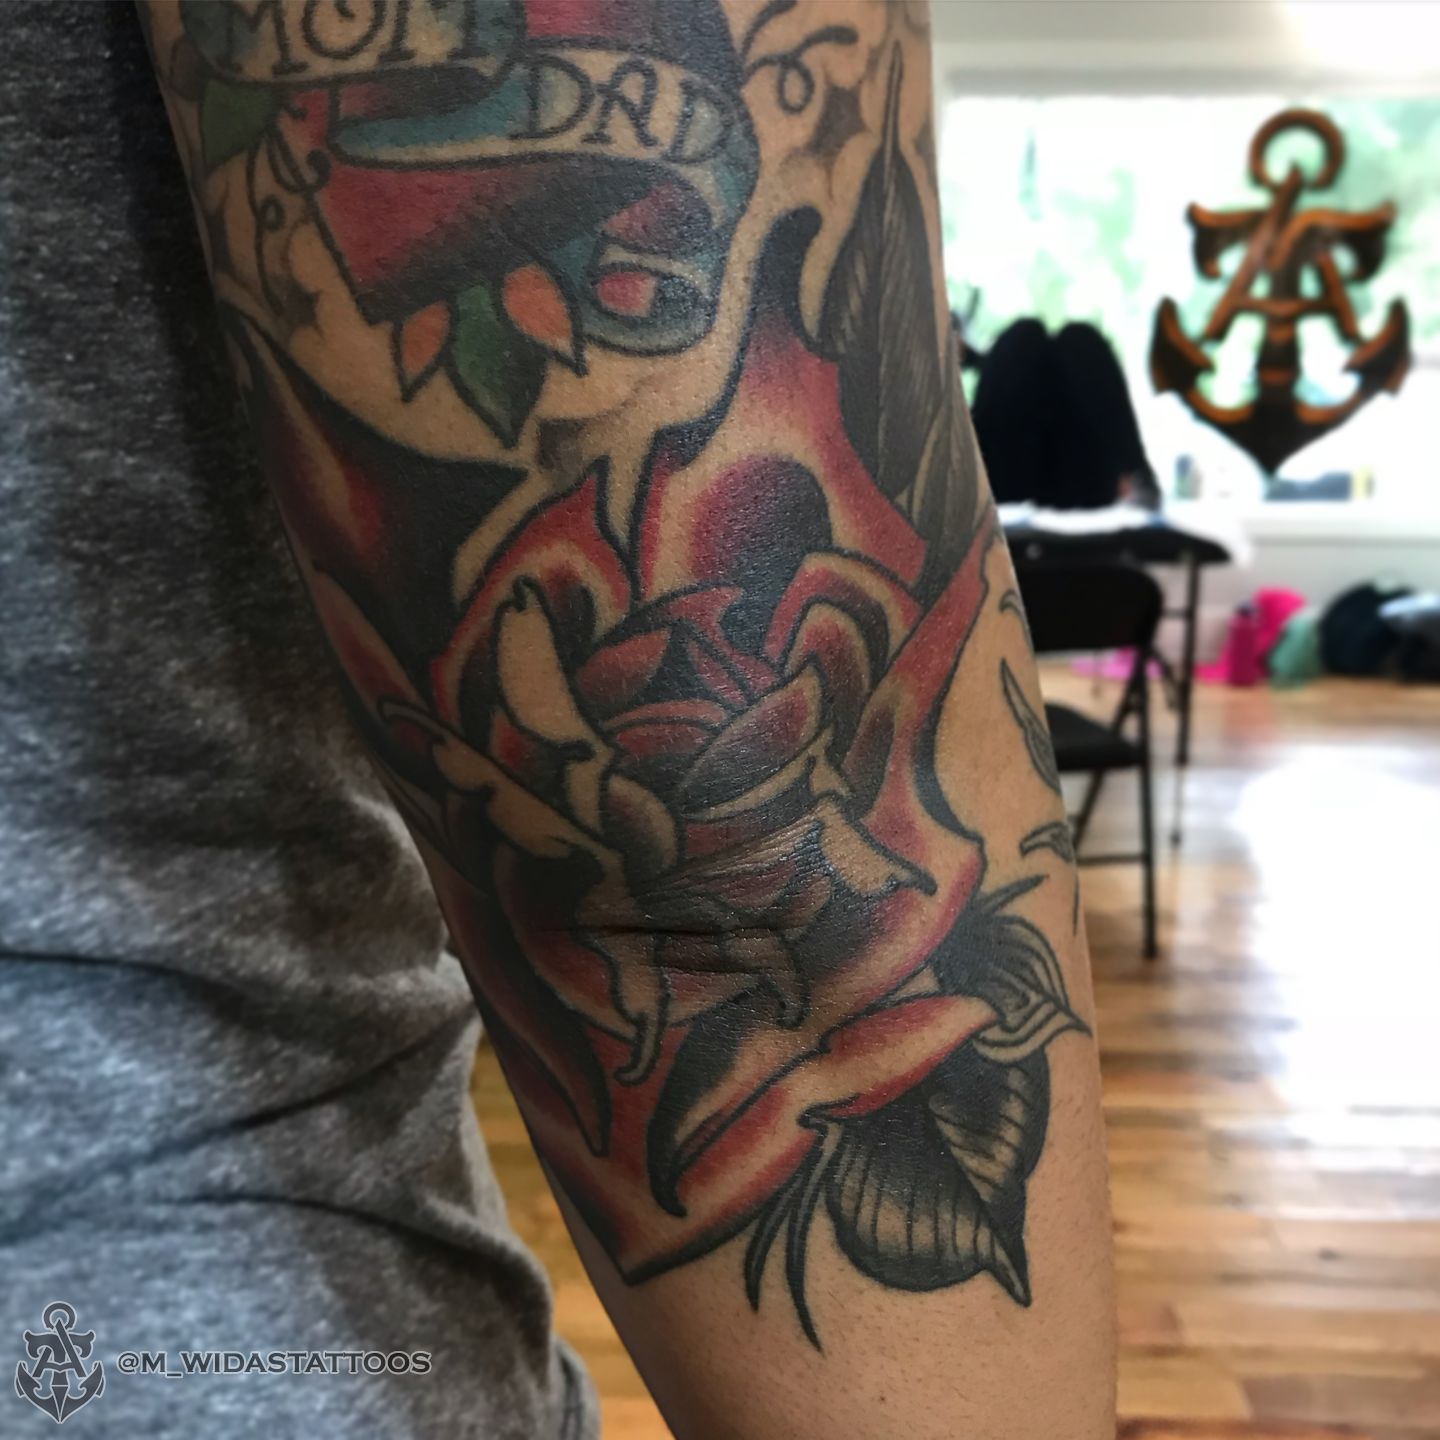 Colorful Traditional Flower Tattoo On Elbow